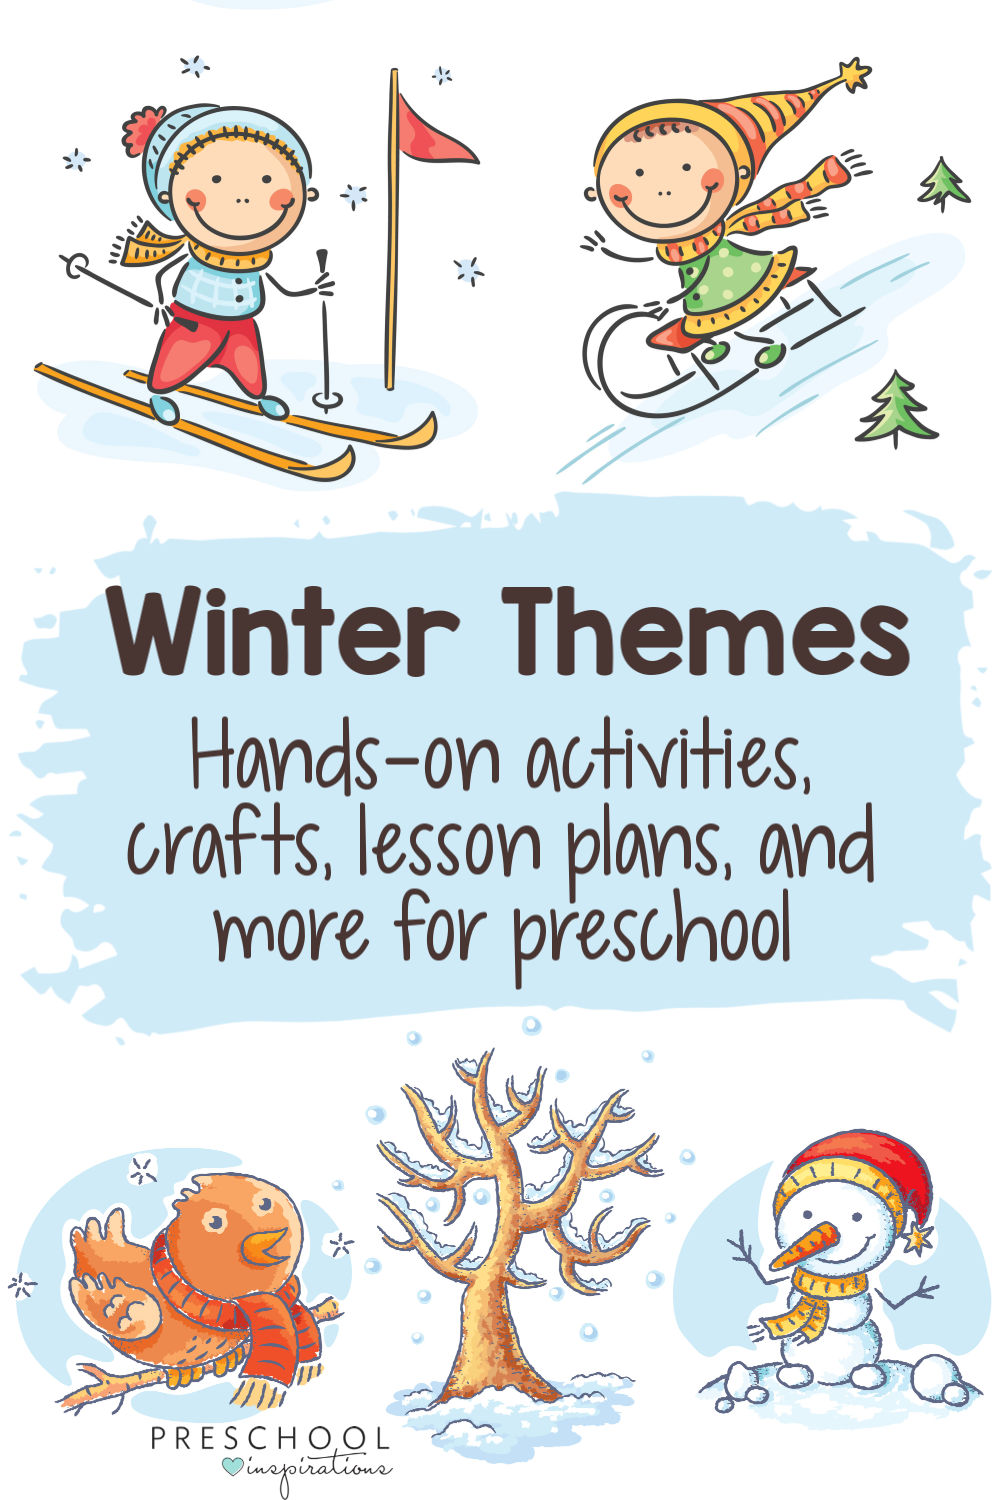 Whether you need winter crafts, hands-on learning activities, lesson plans, or themes for teaching preschool, we've got you covered! #preschoolinspirations #preschool #teachingpreschool #ece #preschoolthemes #winter #wintercrafts